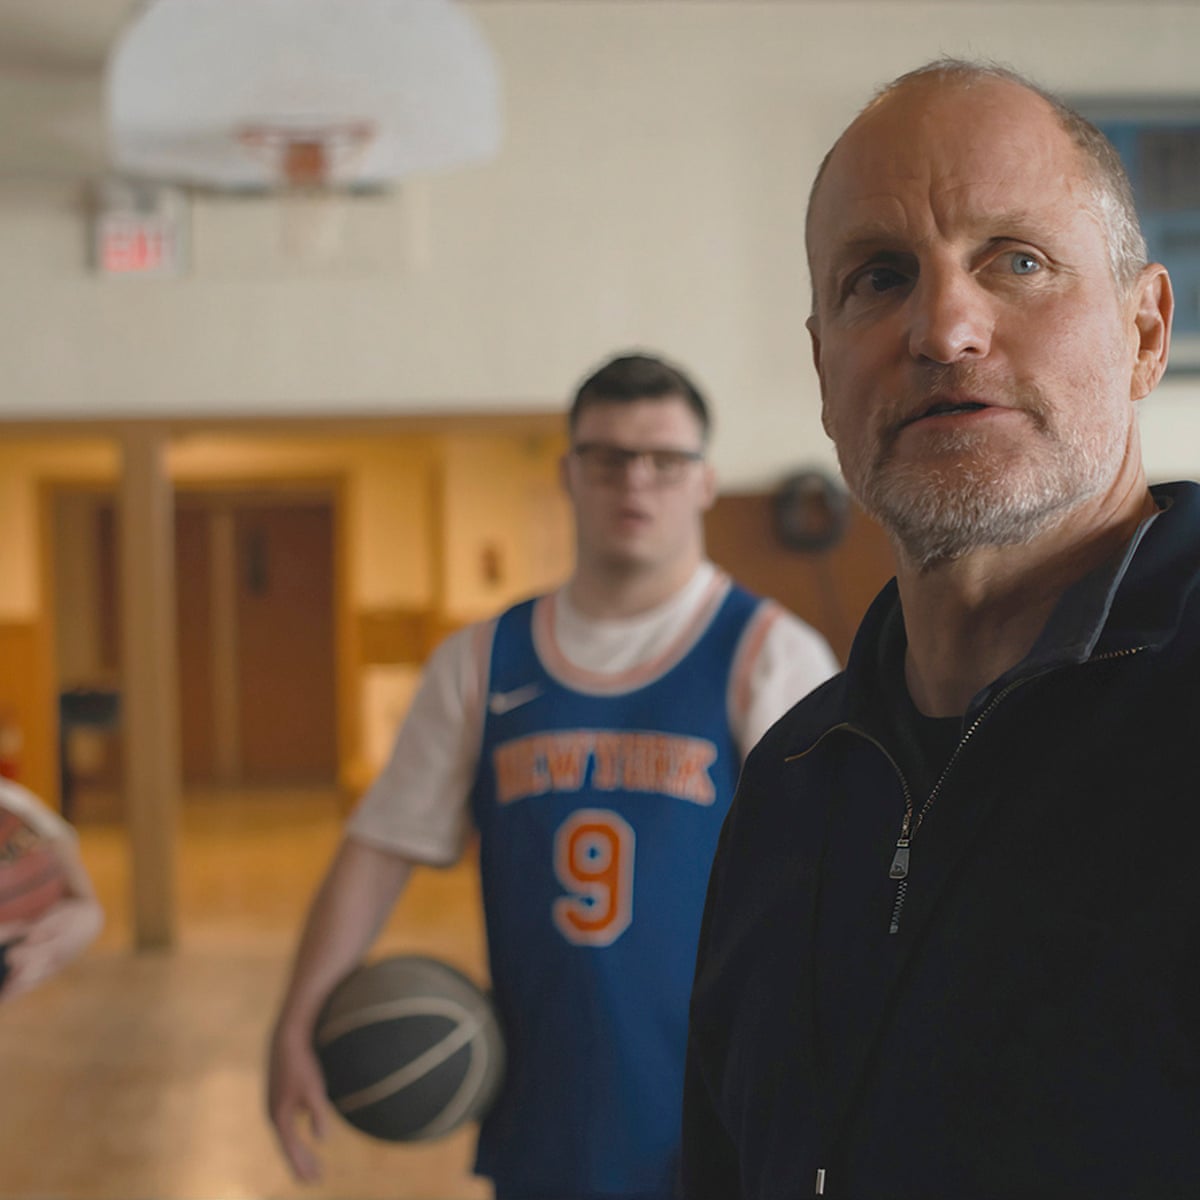 Champions review – uplifting hoop dreams with Woody Harrelson co | Drama films | The Guardian